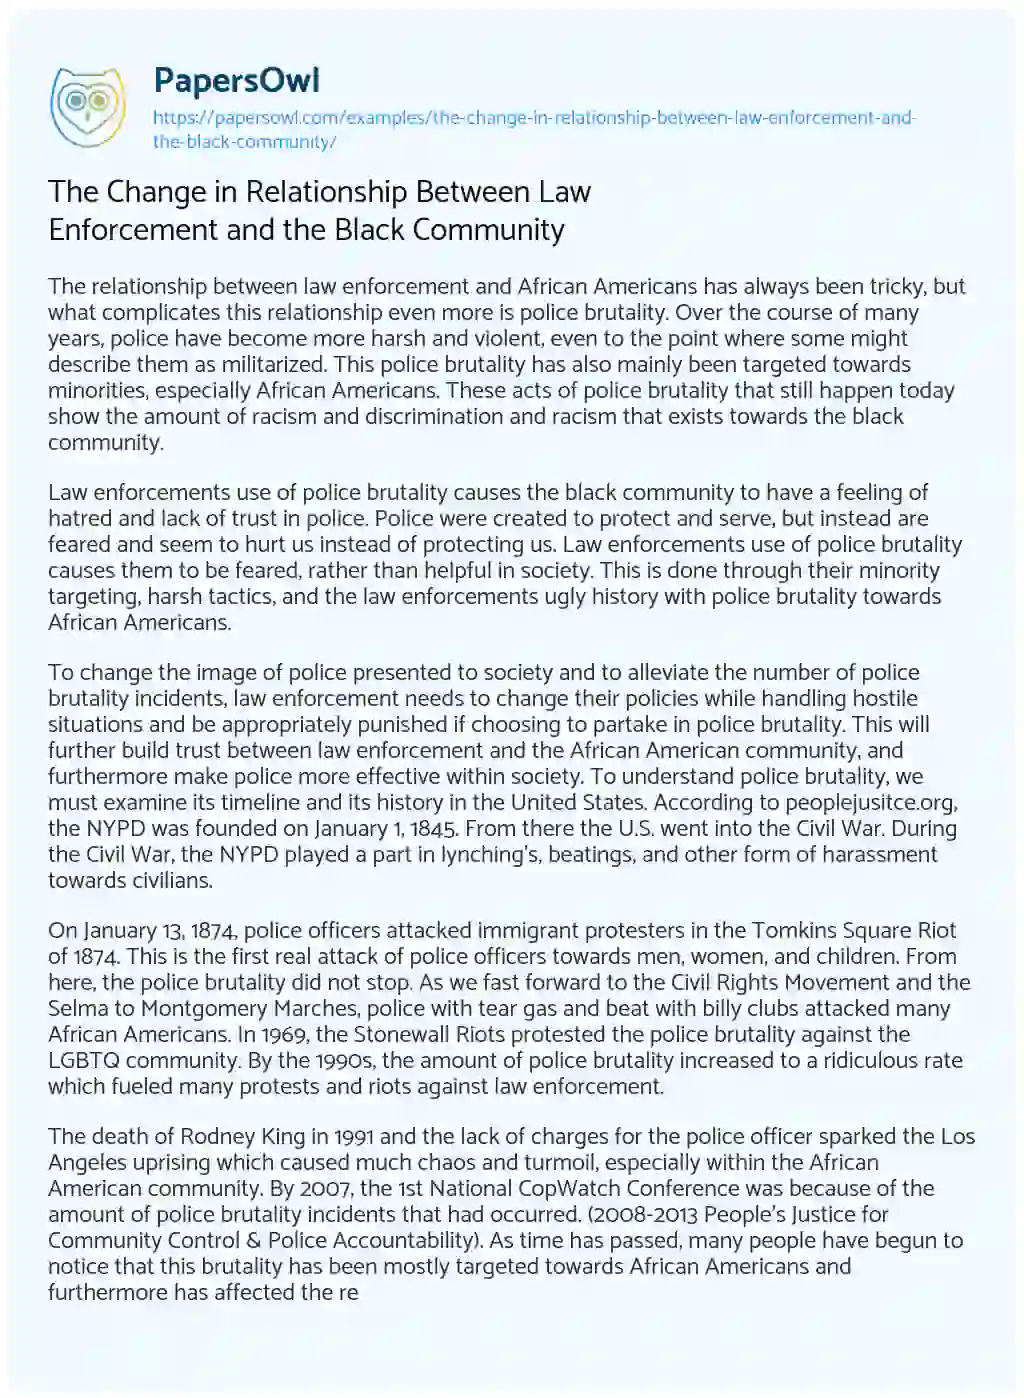 The Change in Relationship between Law Enforcement and the Black Community essay